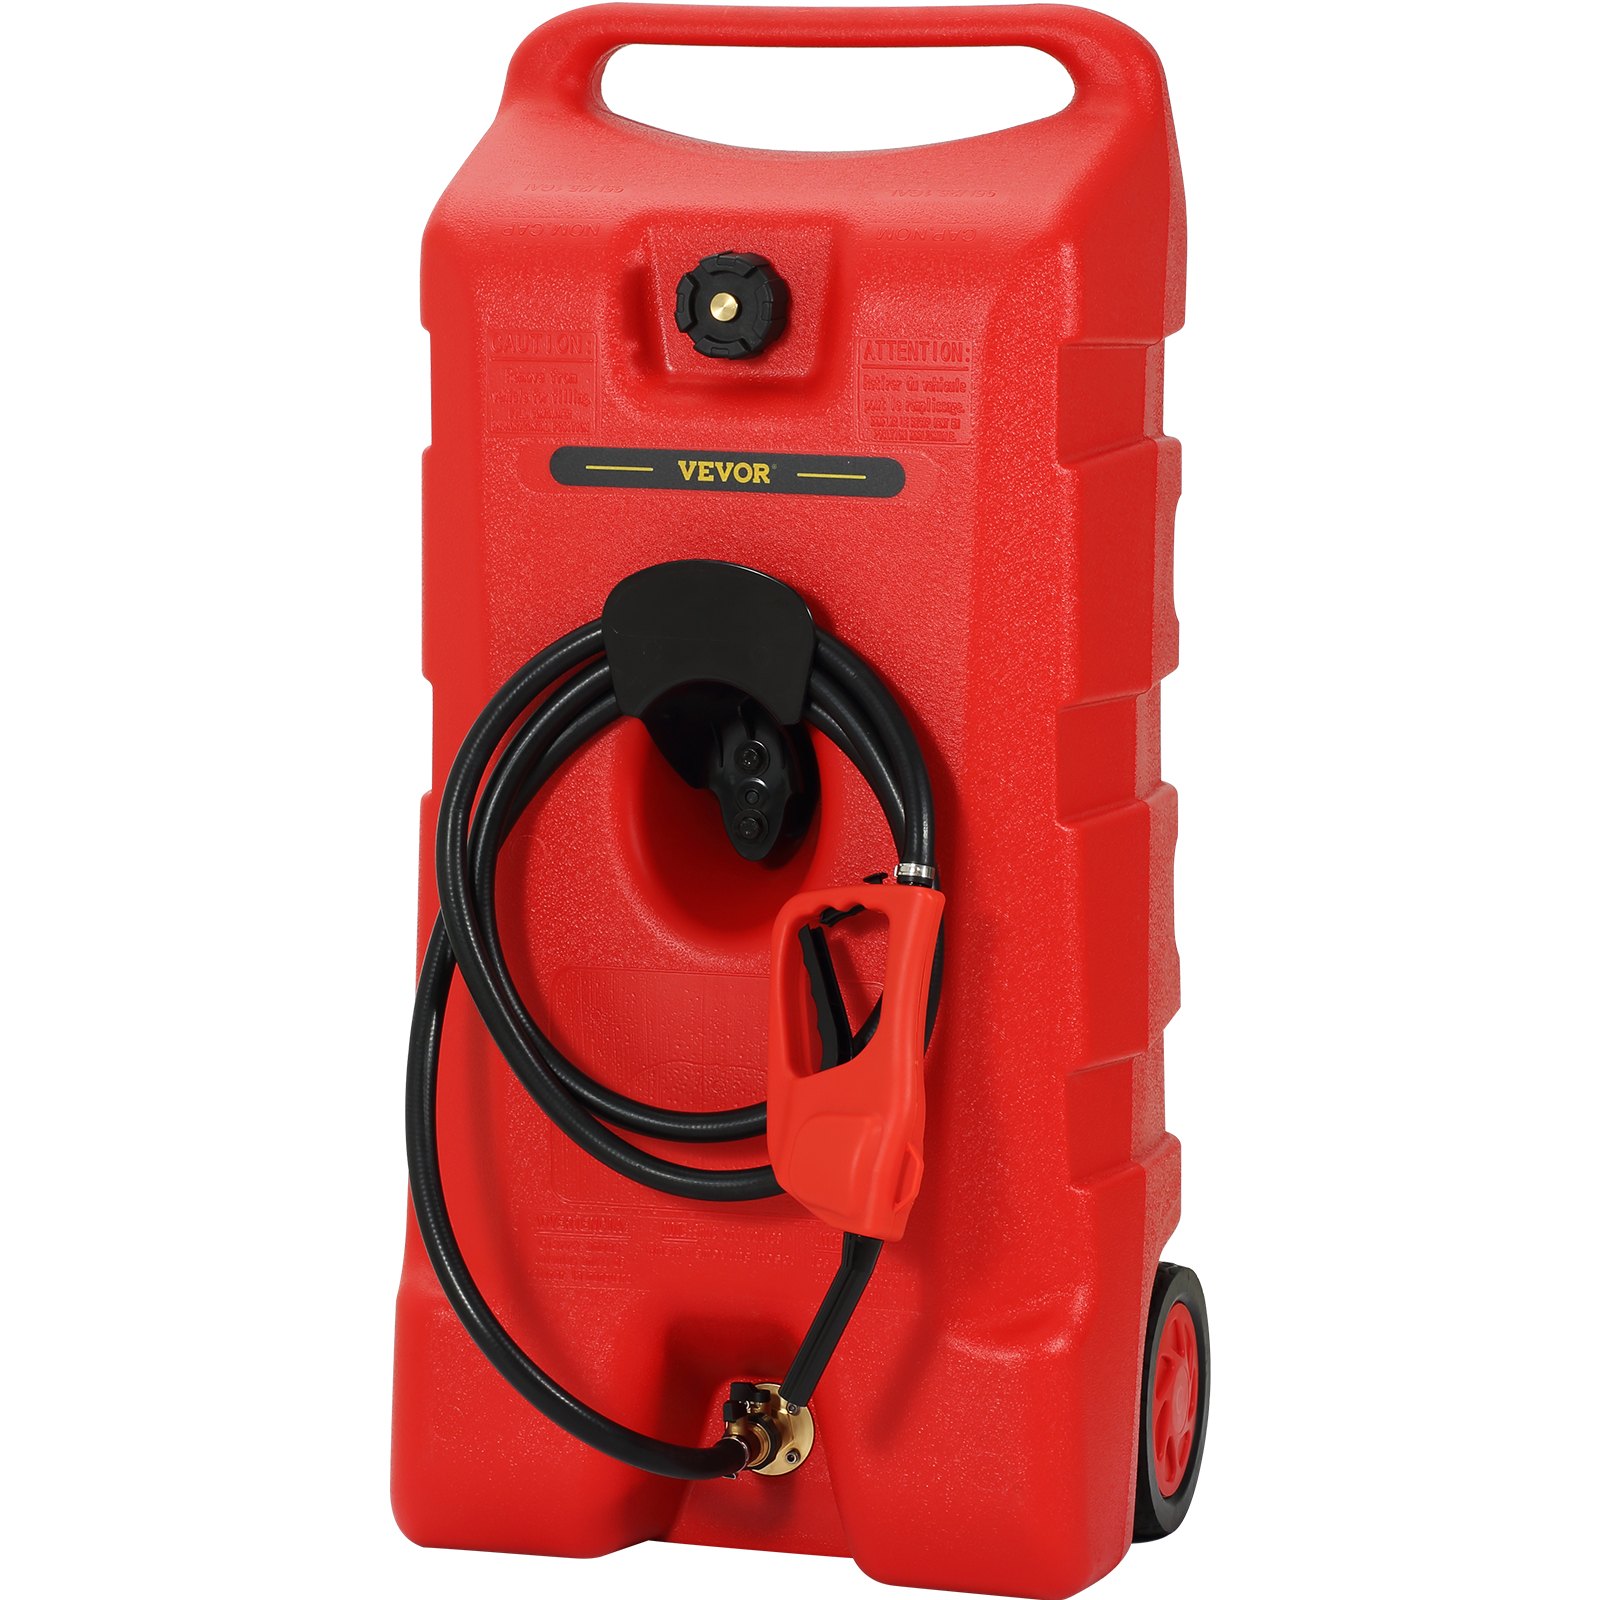 VEVOR Fuel Caddy, 25 Gallon, Gas Storage Tank on-Wheels, with Siphon ...